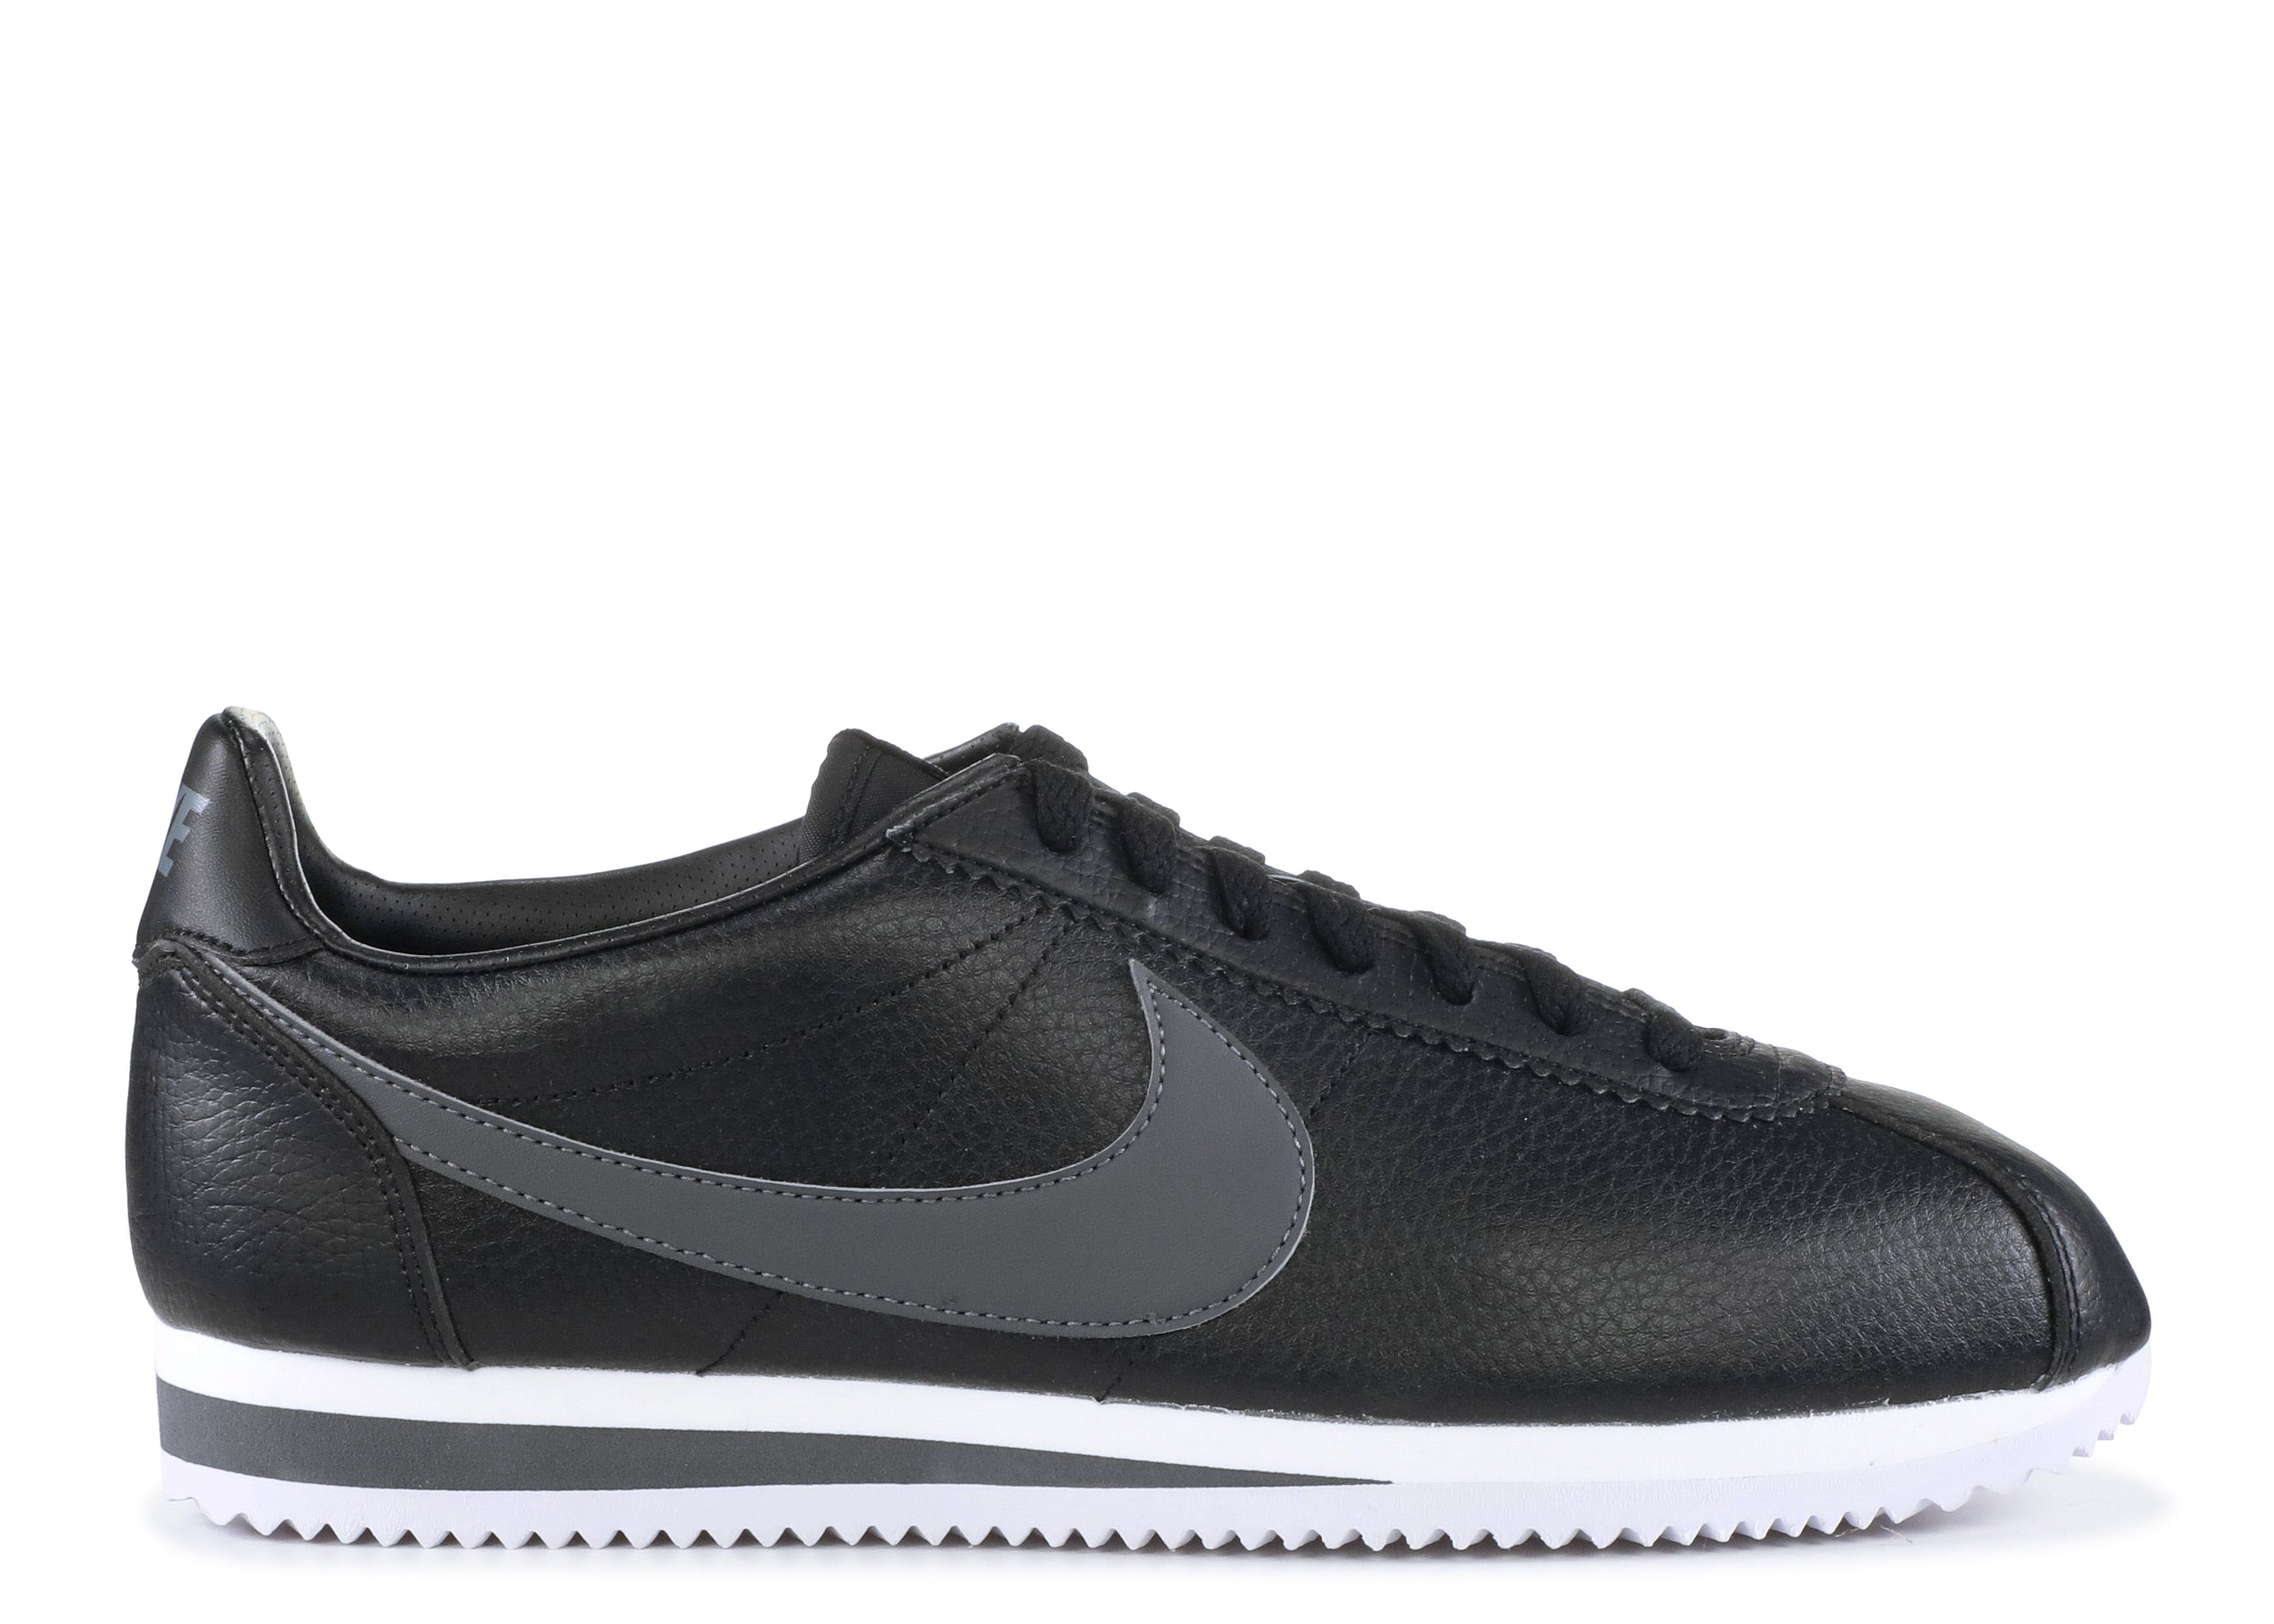 nike cortez black and gray online -